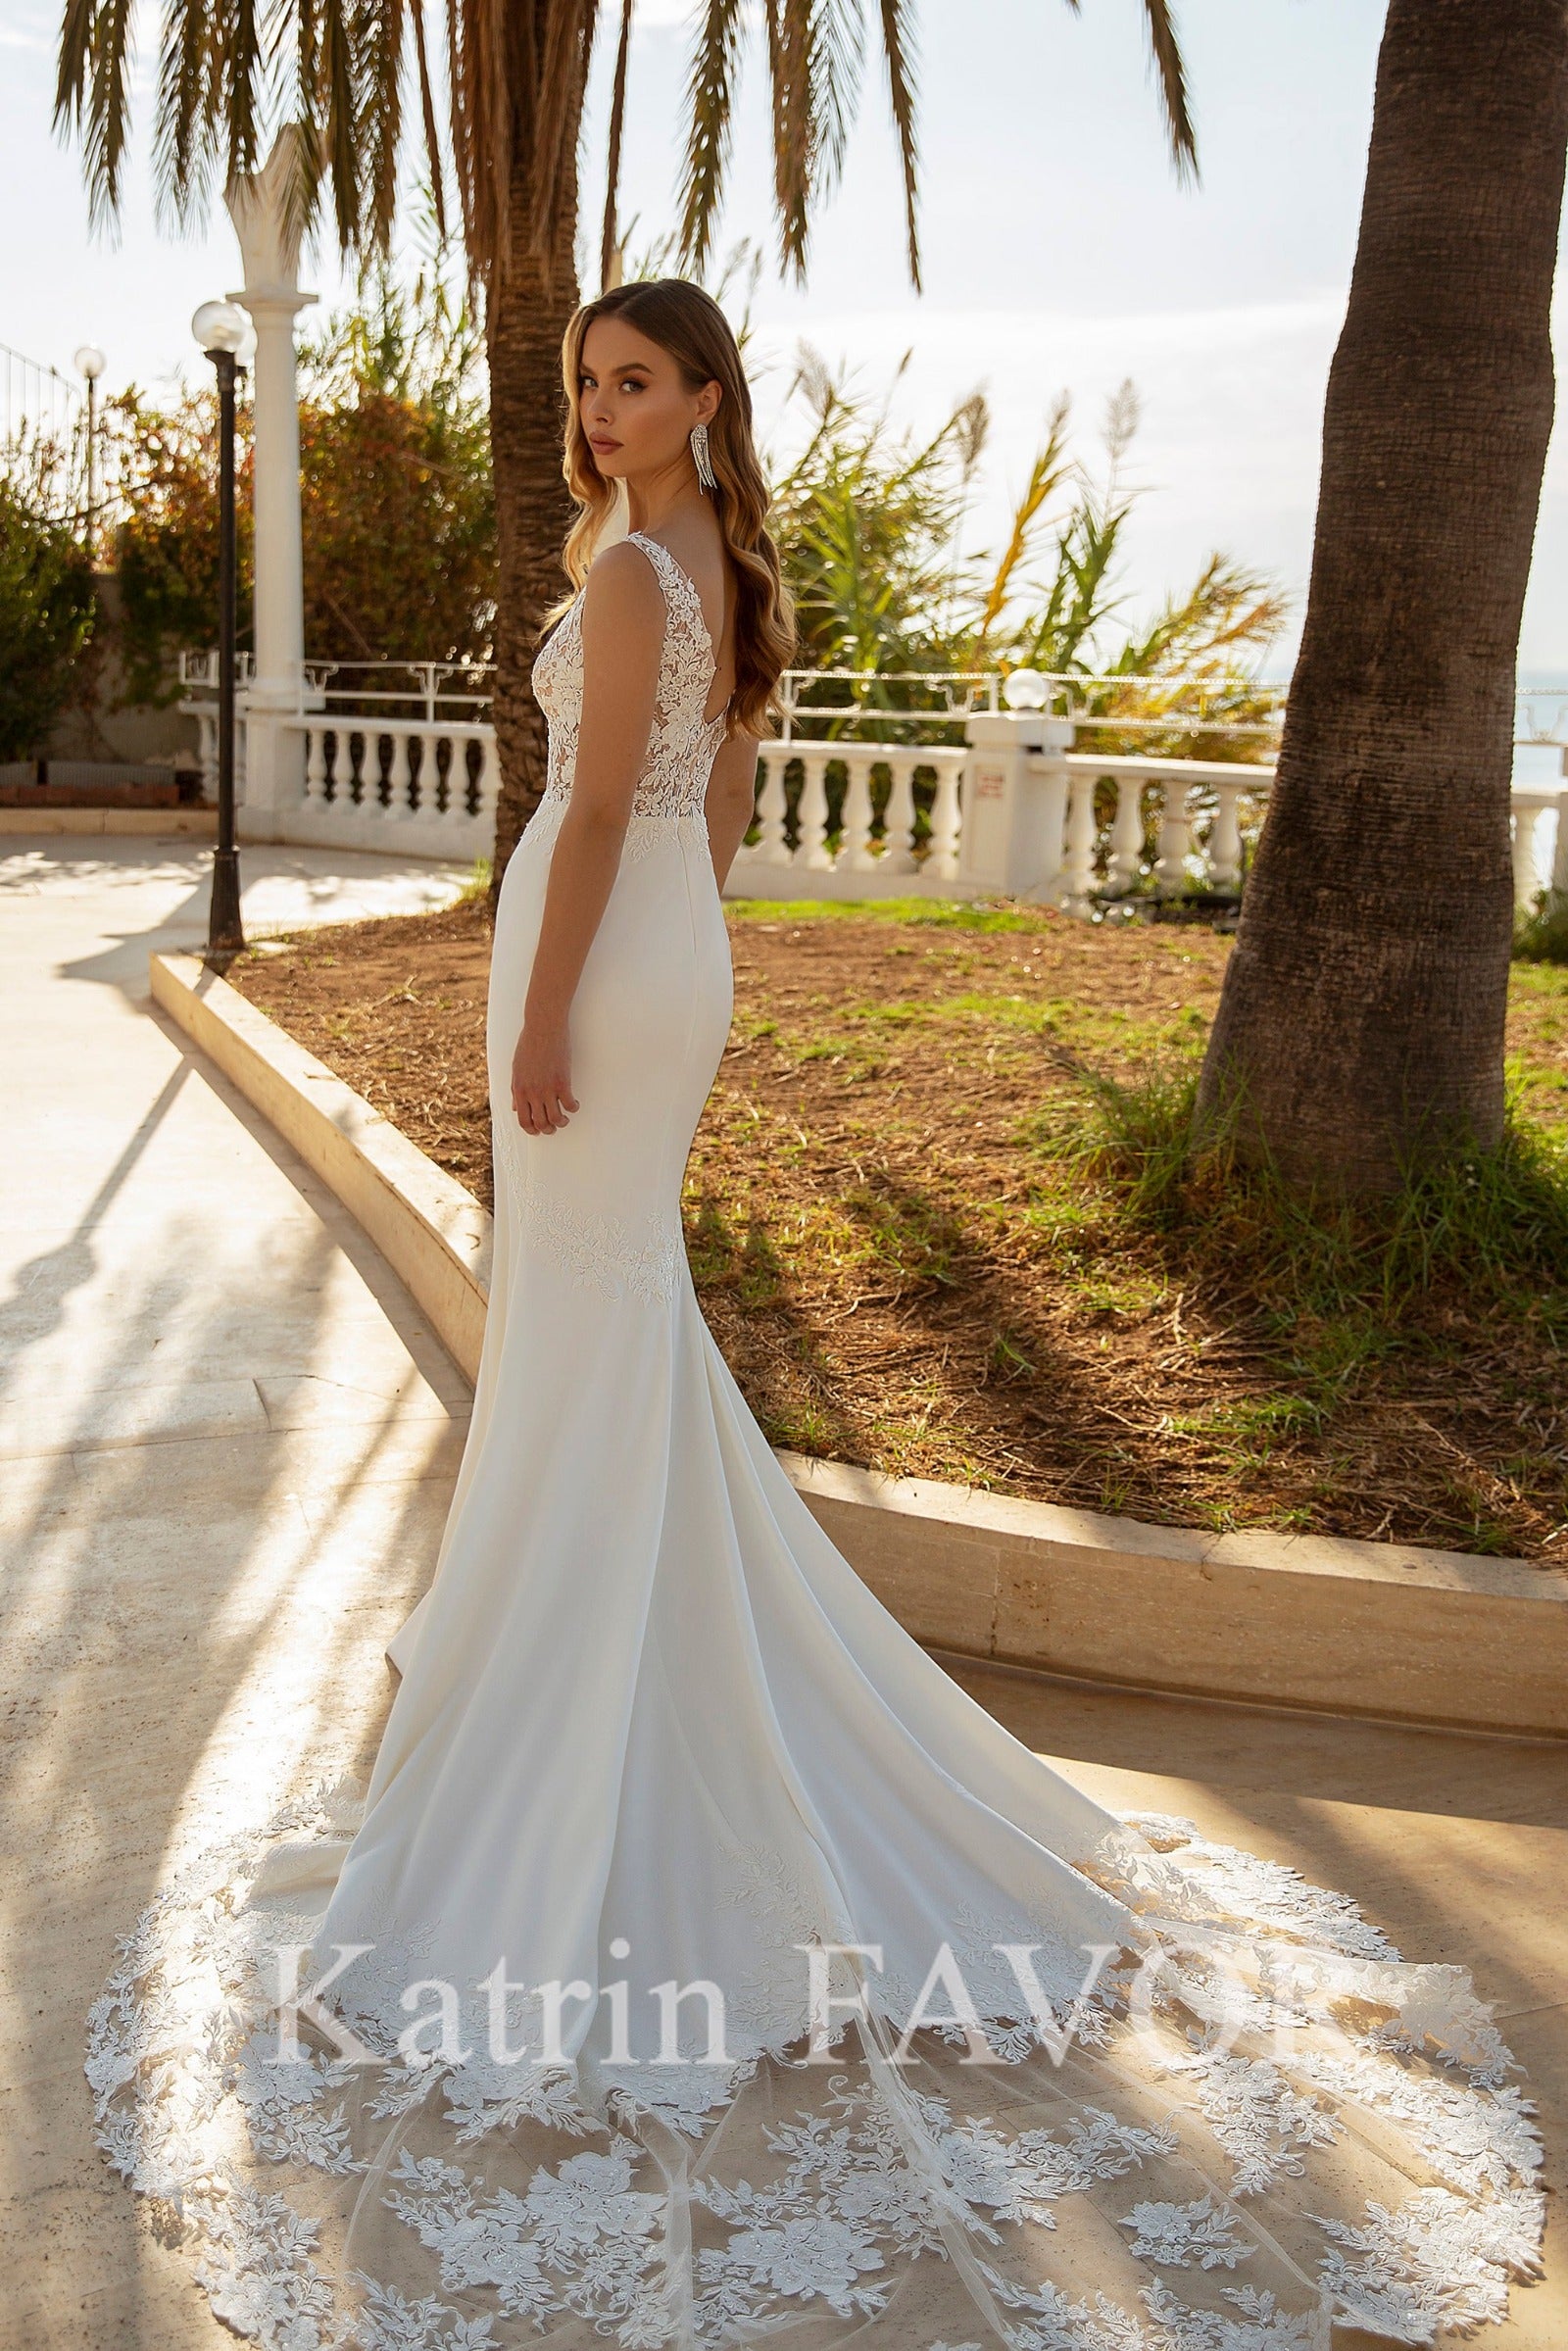 KatrinFAVORboutique-Sexy mermaid wedding dress with lace train